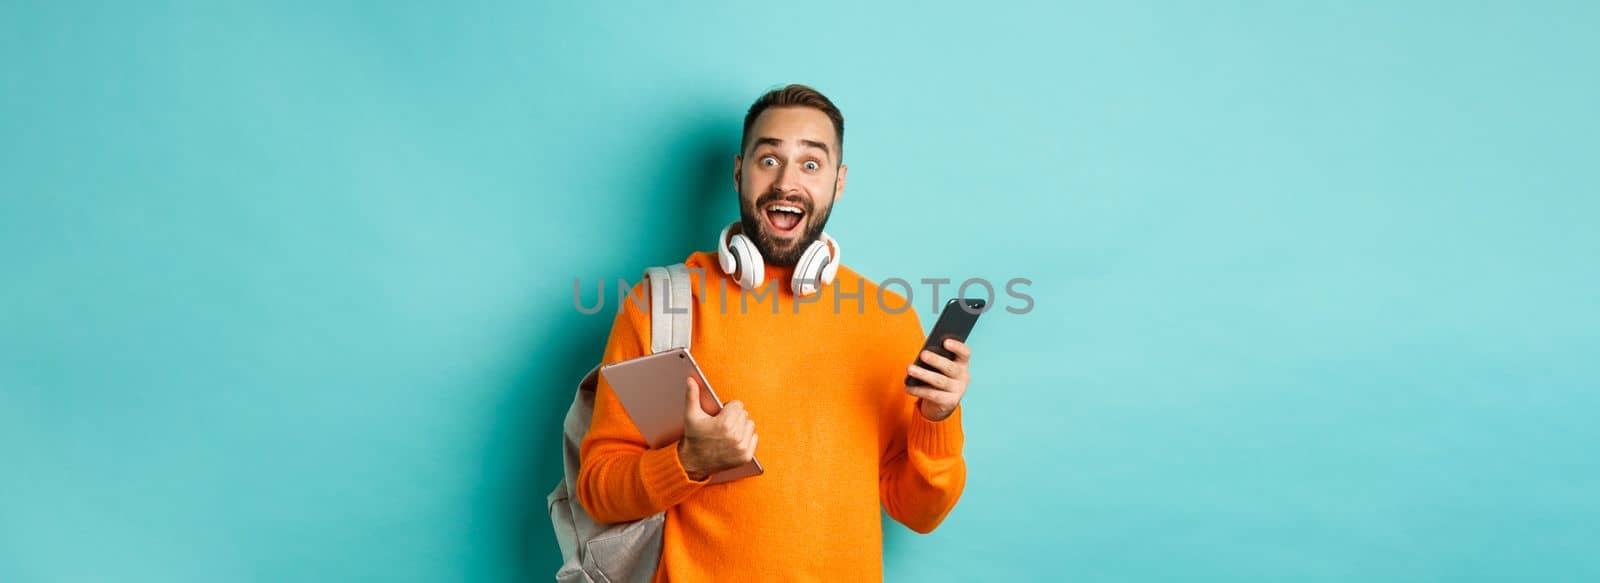 Handsome man student with headphones and backpack, holding digital tablet and smartphone, looking amazed at camera, standing against turquoise background.